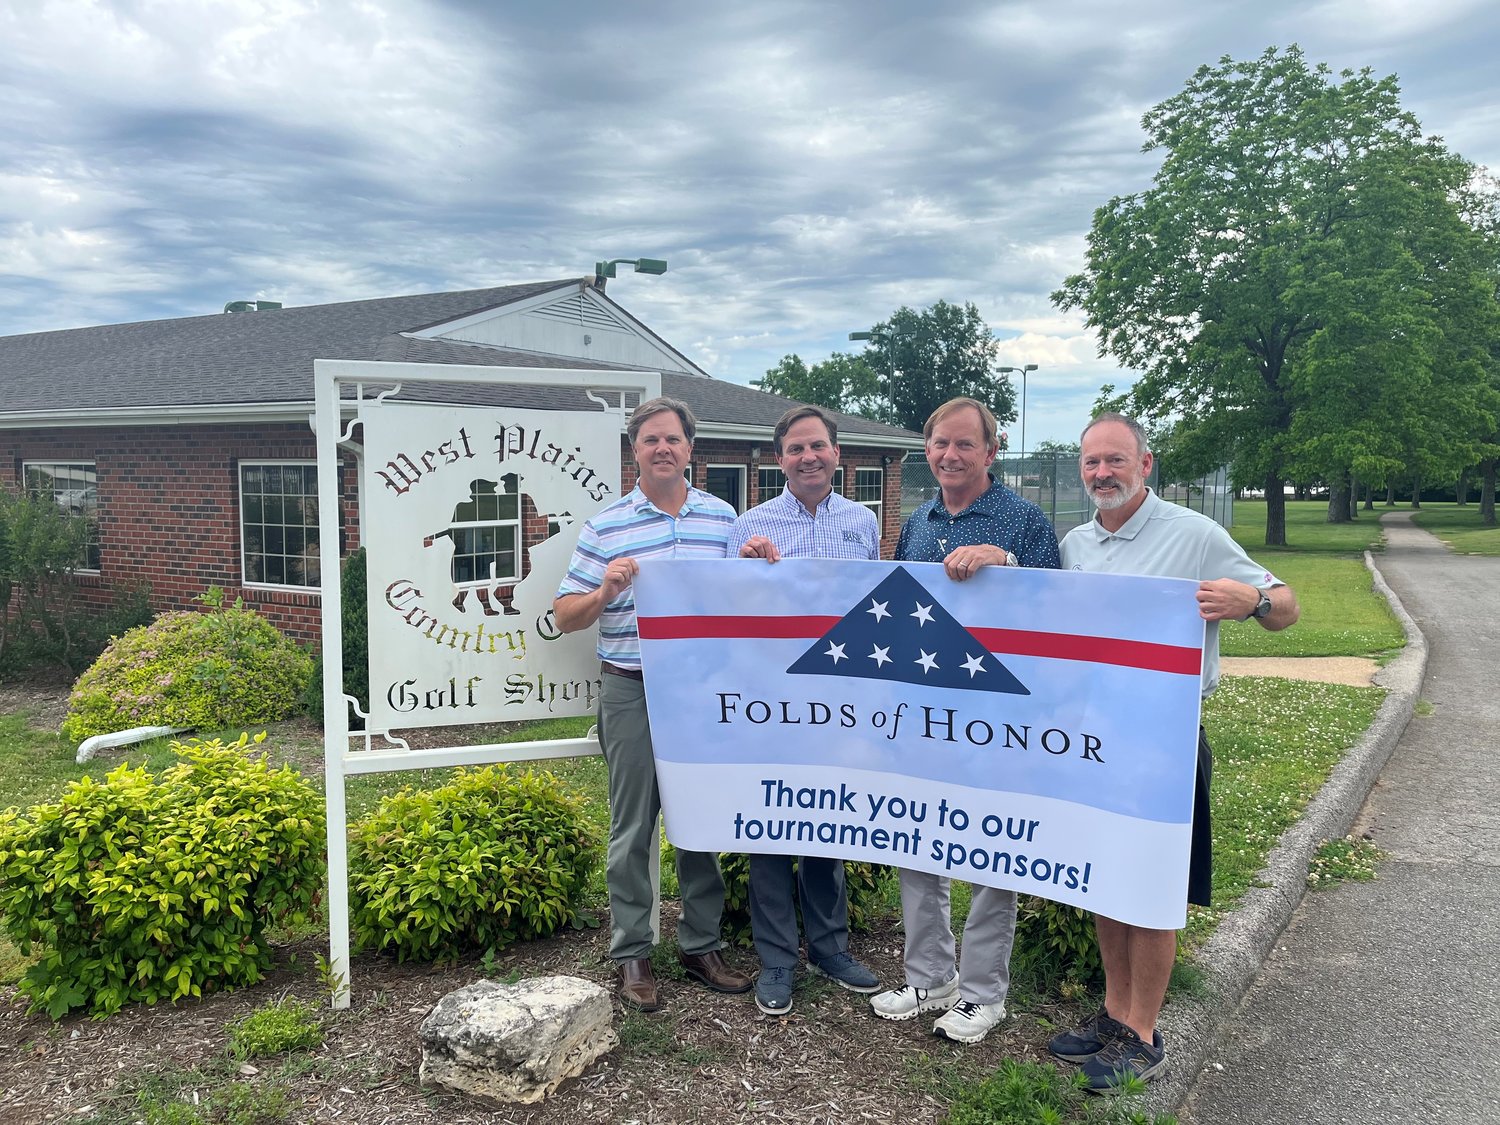 The First Annual Folds of Honor Golf Tournament will be held on Friday, June 24, 2022, at the West Plains Country Club. For additional information regarding the West Plains Folds of Honor Golf Tournament, including registration or sponsorship information, please visit the West Plains Folds of Honor Golf Tournament Facebook event page, email fohwestplains@gmail.com  or call David M. Gohn at 417.505.9150 or David Thomas at 417.372.2835. Pictured, from left, tournament organizers Dave Thomas, David M. Gohn, Greg Beykirch, and West Plains Country Club Golf Pro John Utley.